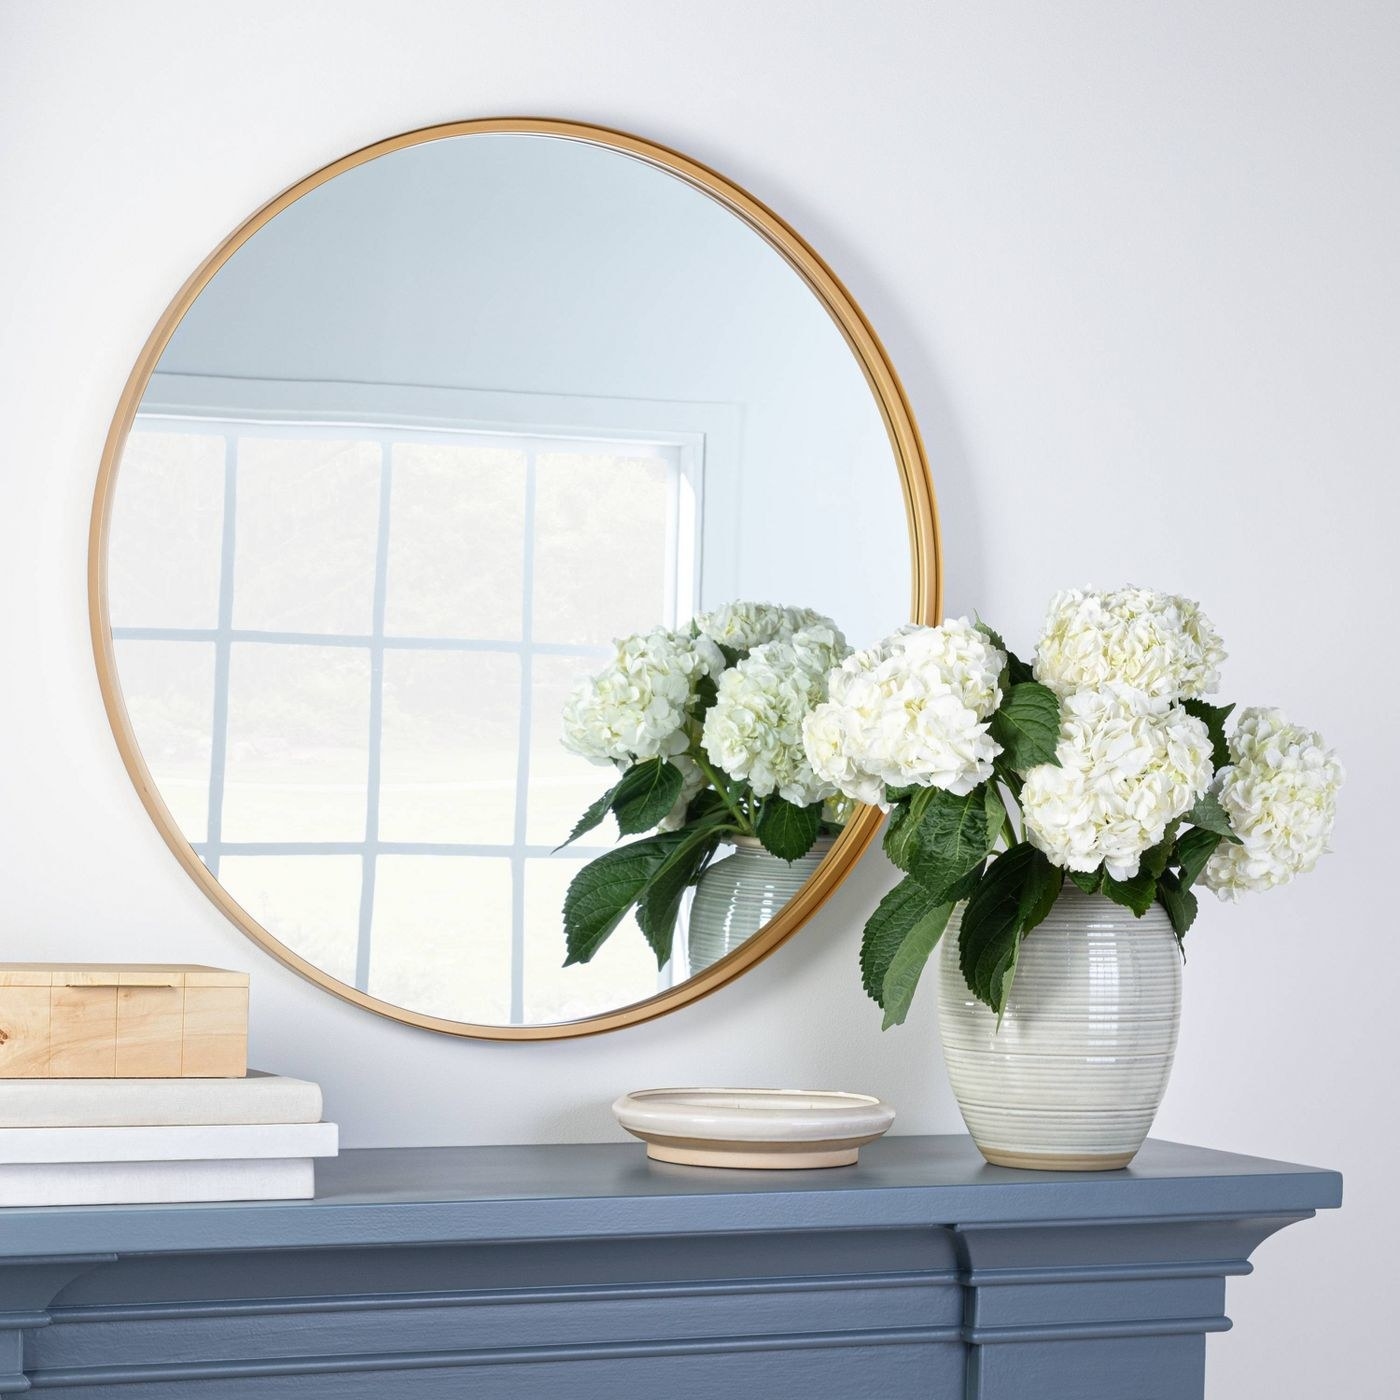 A round decorative mirror hanging above a mantle